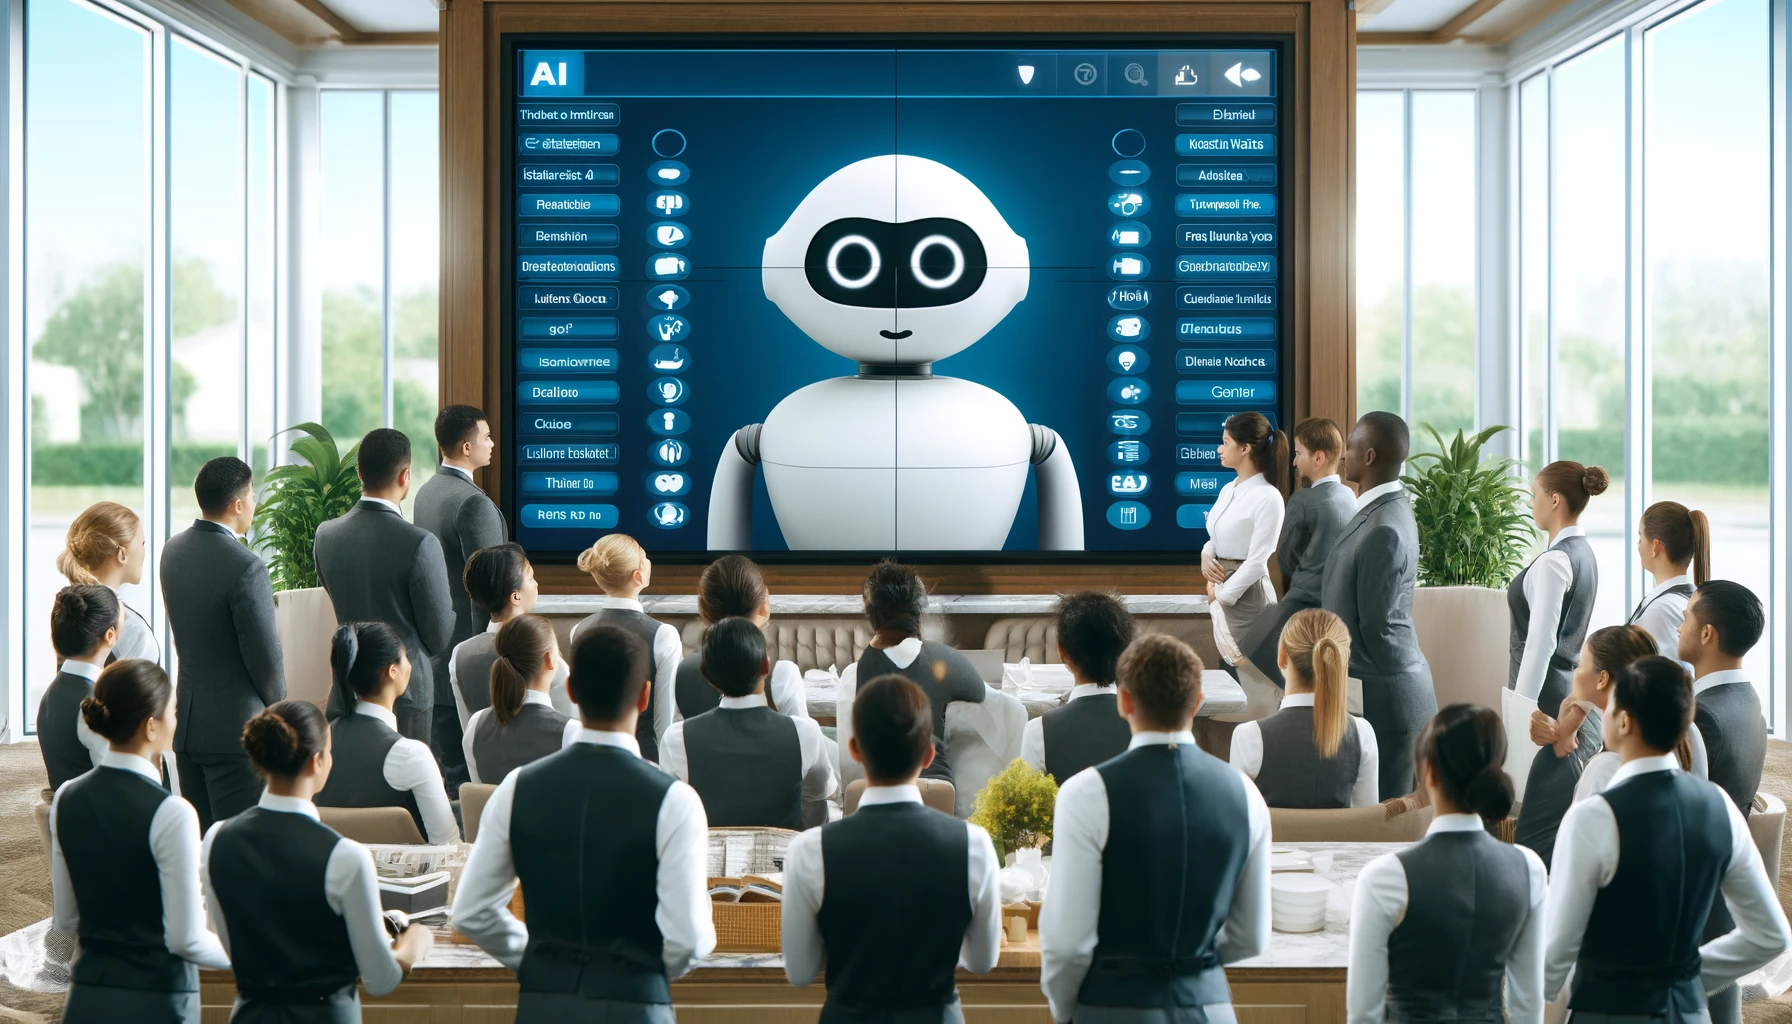 AI Chatbots in Hotels: Enhancing Guest Experiences through Brand-Aligned Technology and Comprehensive Staff Training